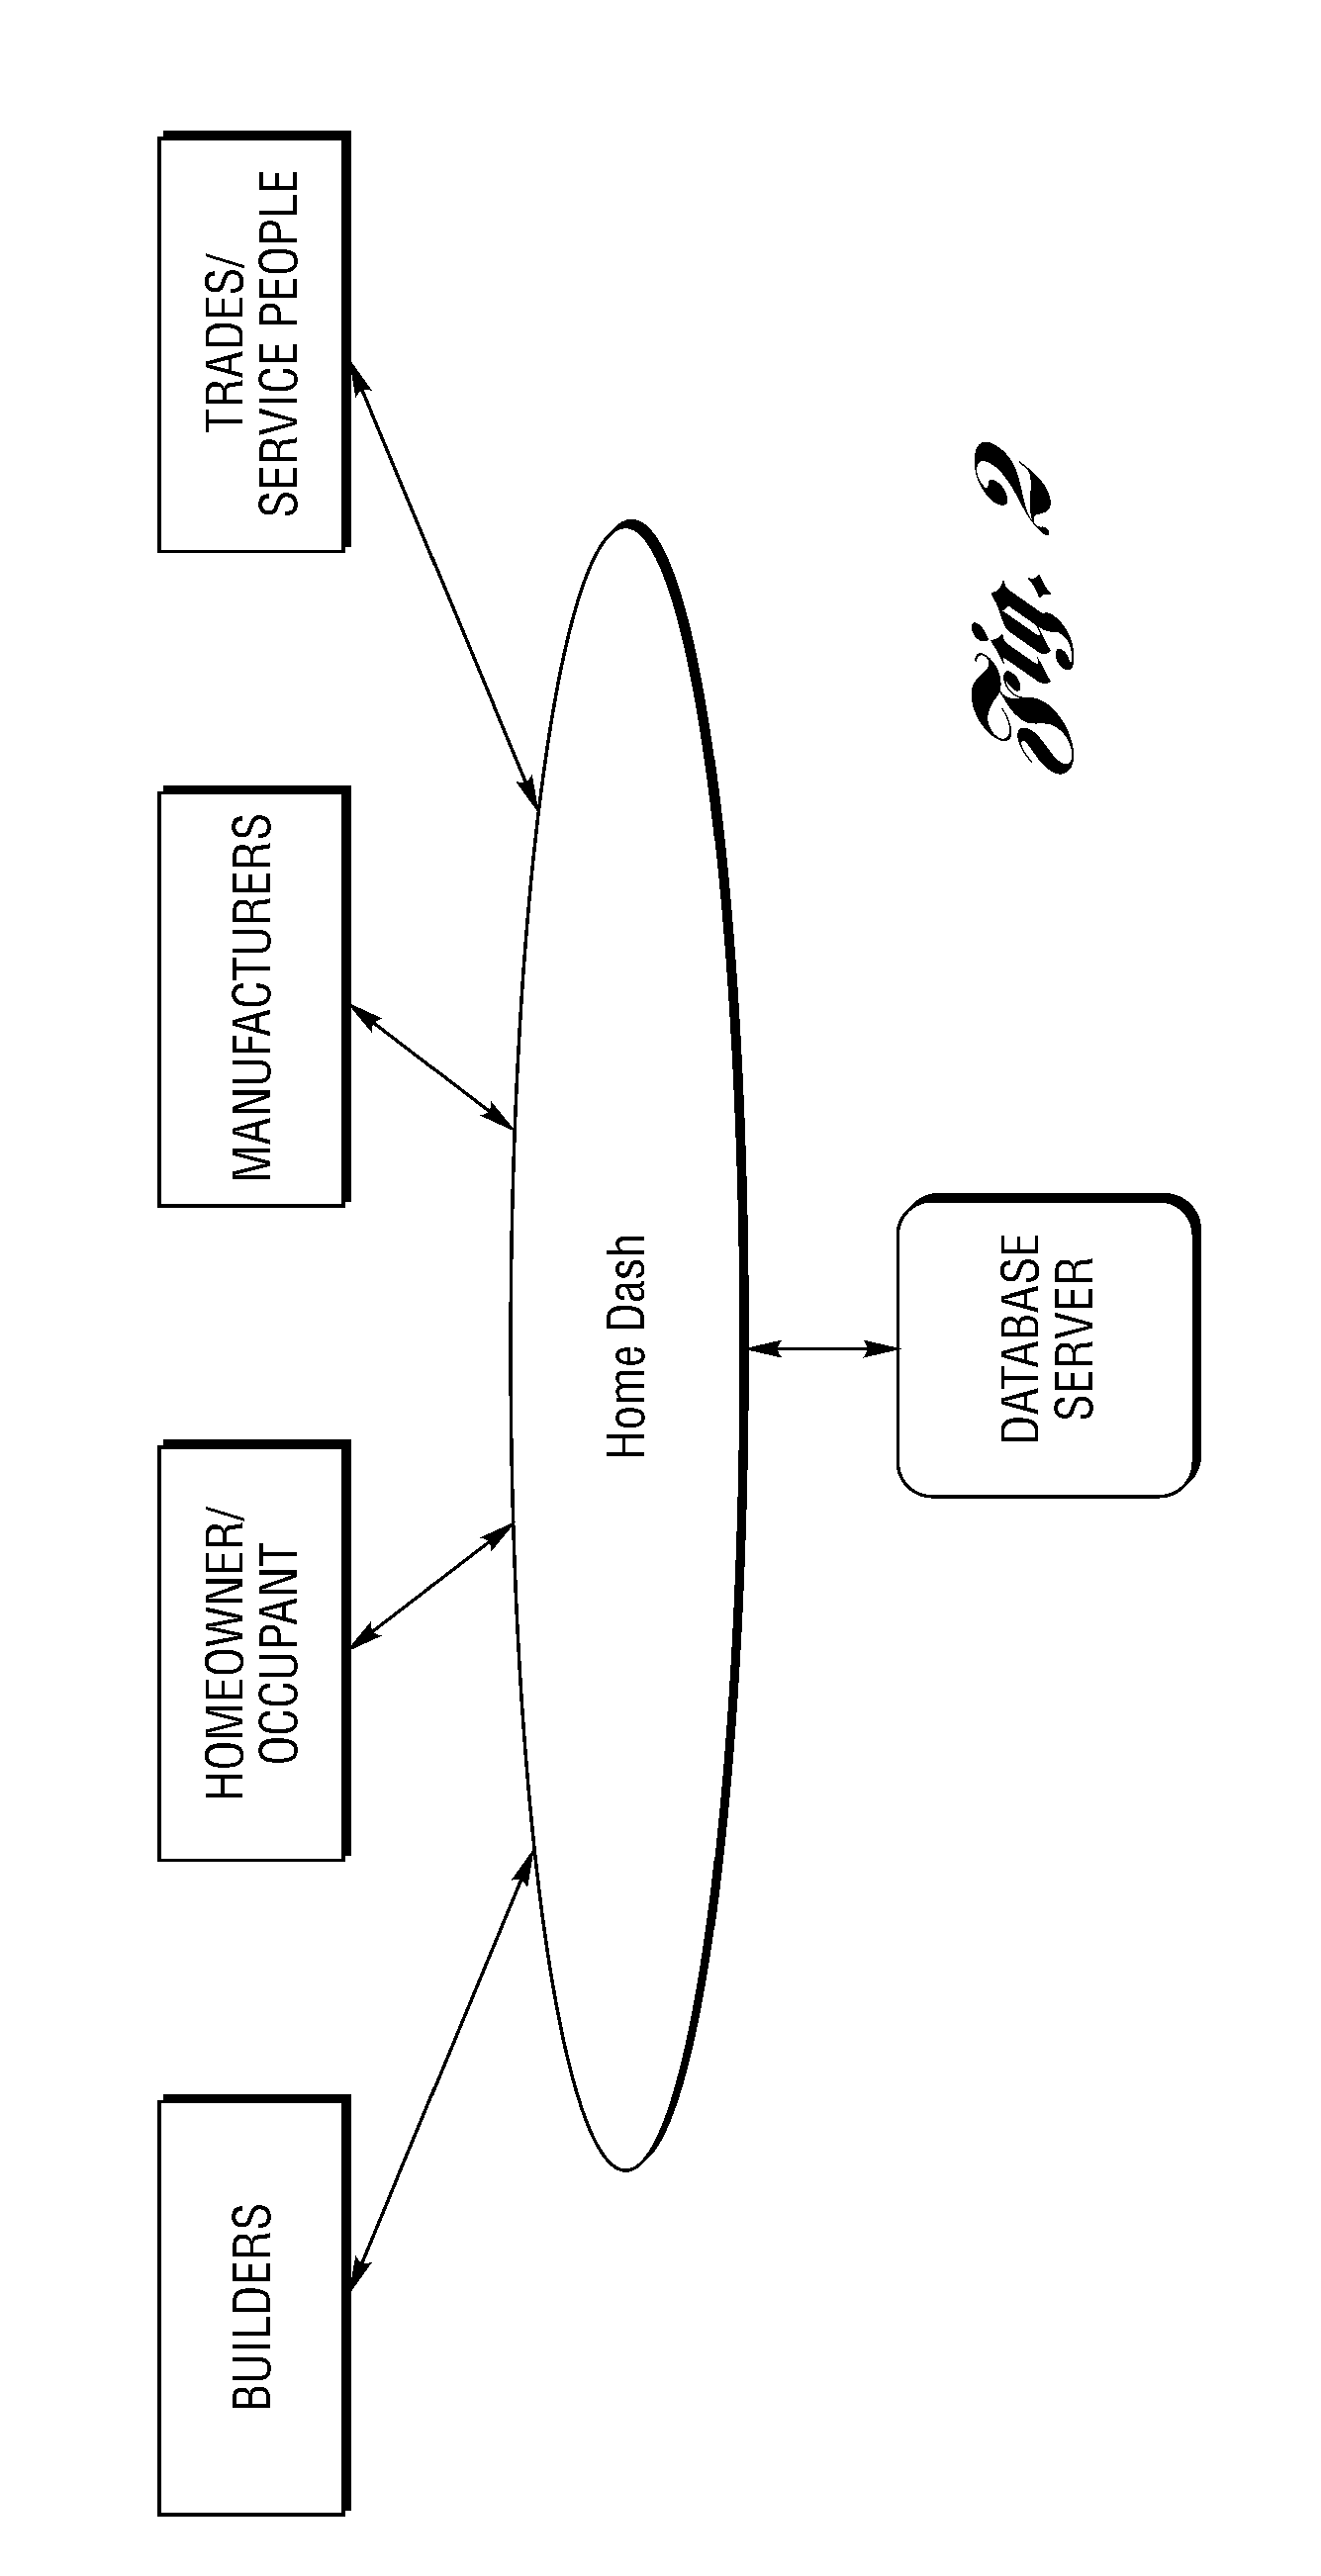 Scalable method and system for connecting, tracking and facilitating warranty, maintenance, service and replacement of products within a community of residential housing and/or commercial building inventories or units over a communications network